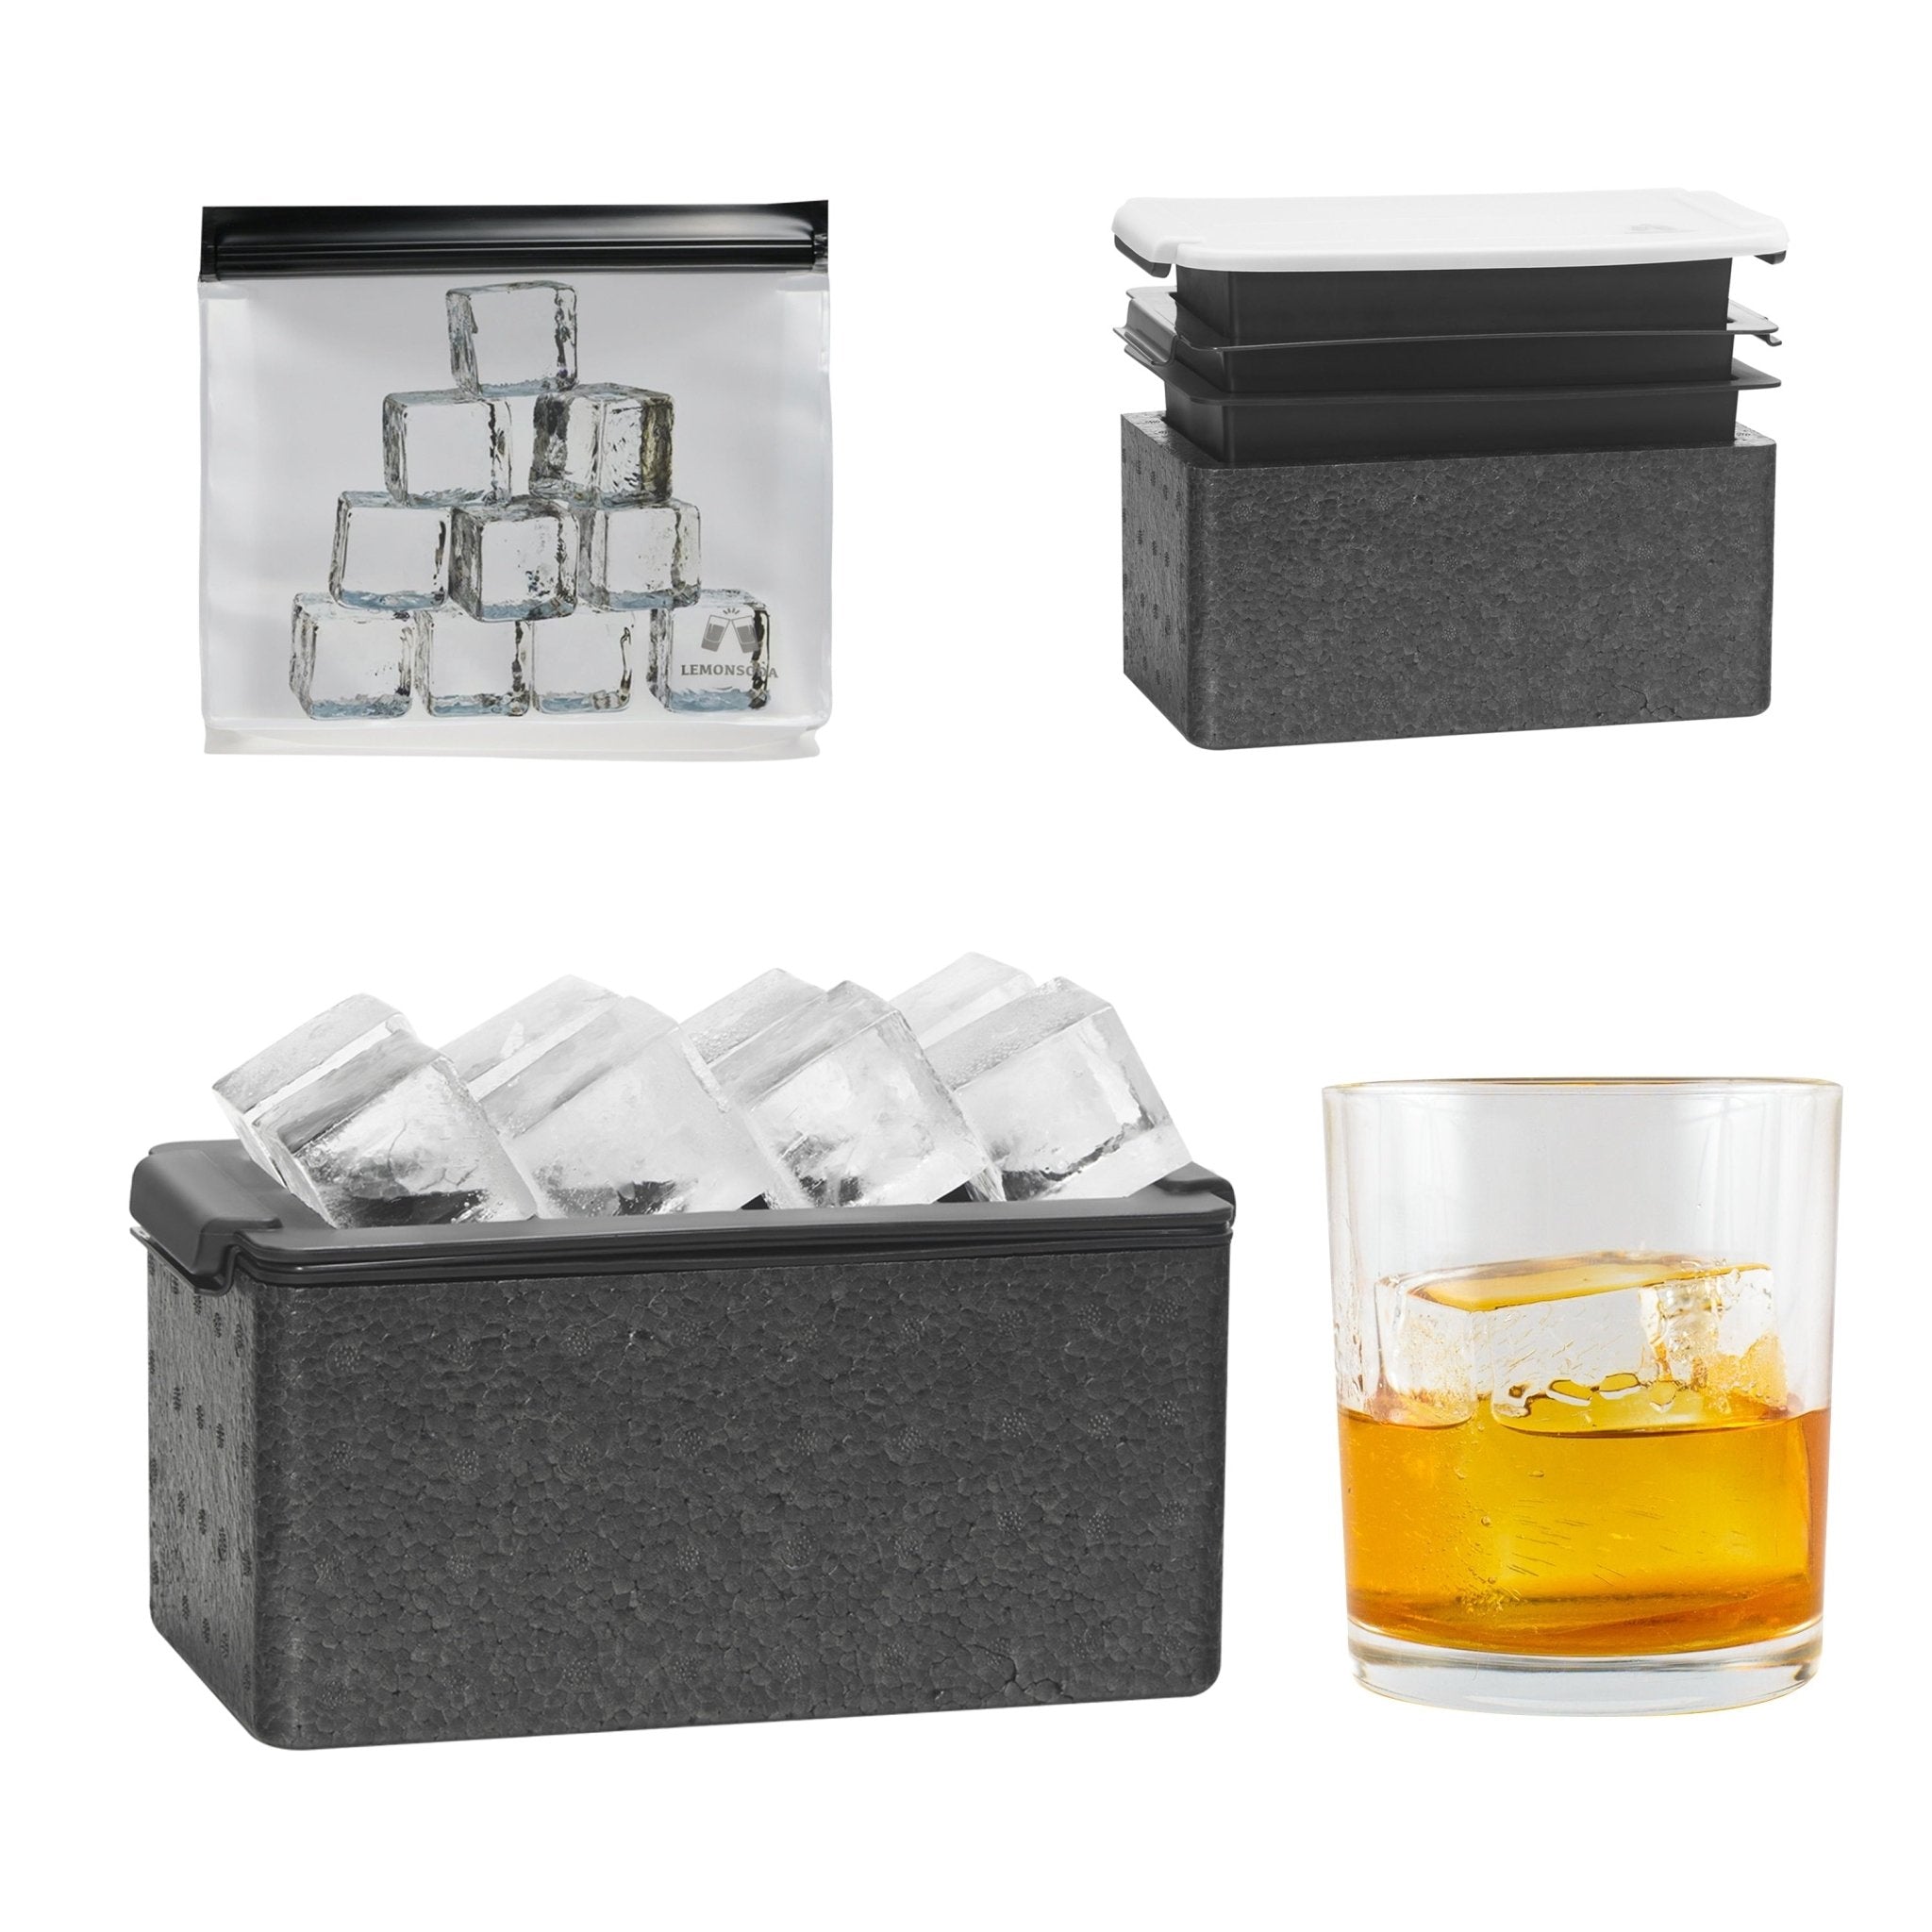 Crystal Clear Ice Cube Maker Tray - Eight 2" Squares Ice Cube Mold